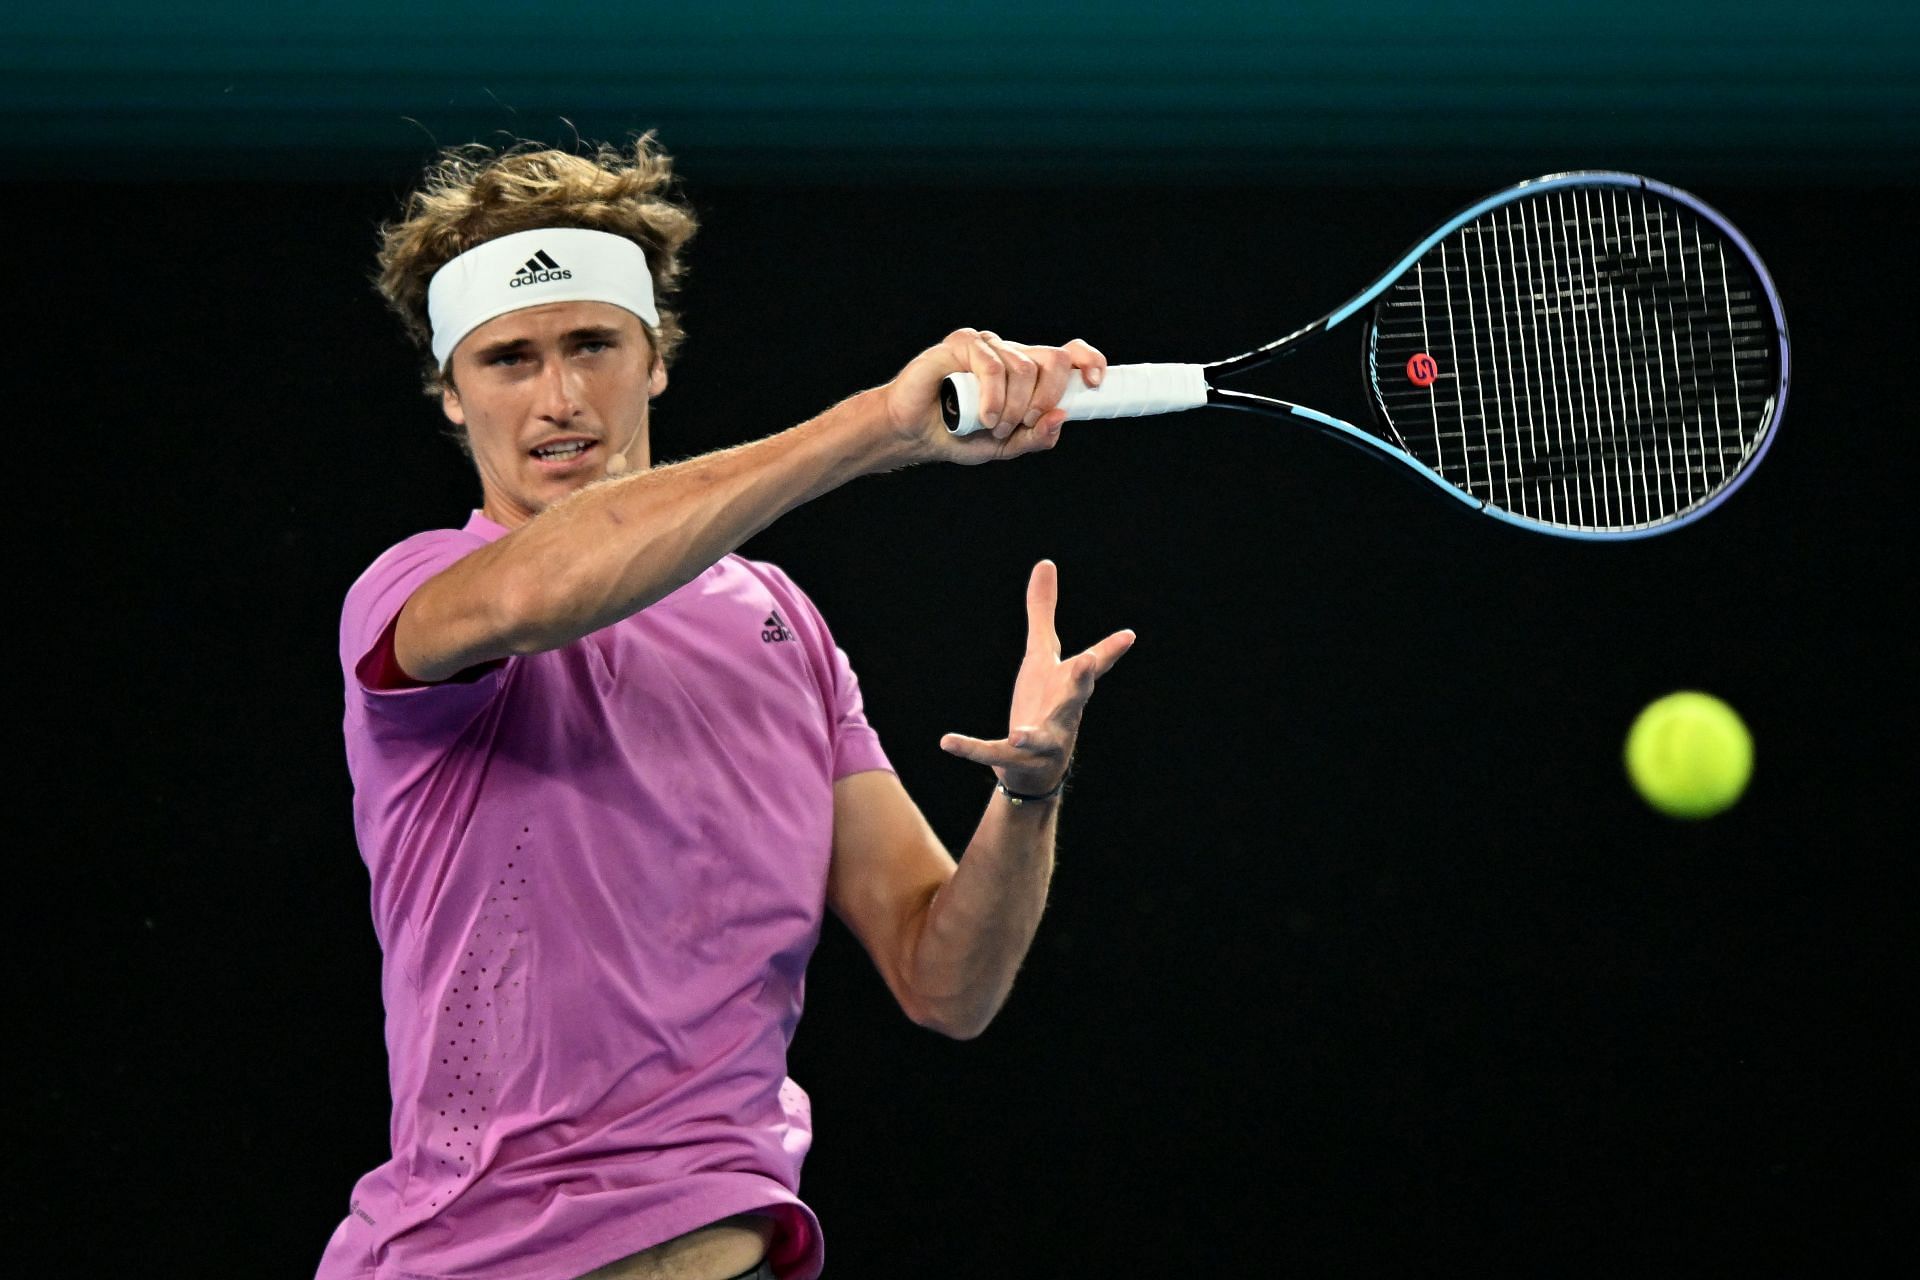 Alexander Zverev will be in action next at the Rotterdam Open